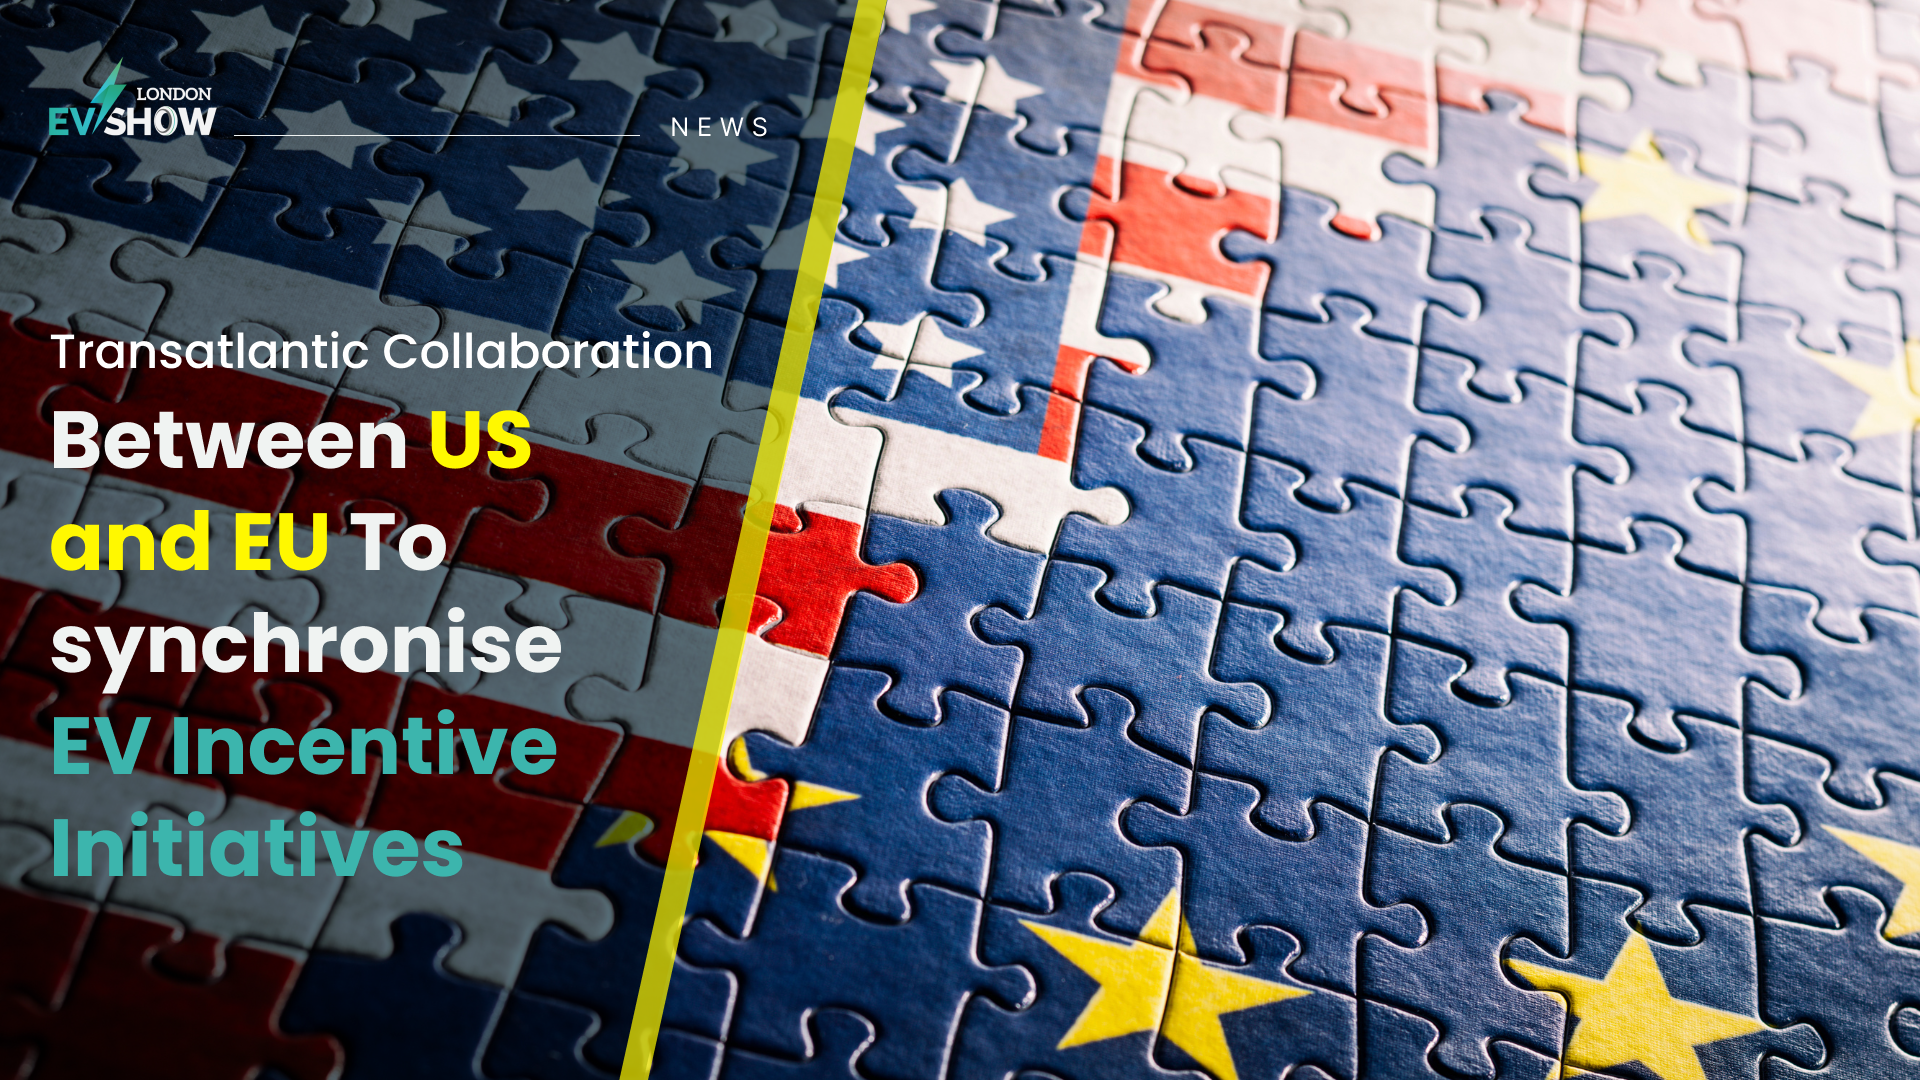 Transatlantic Collaboration Between US and EU To synchronise EV Incentive Initiatives